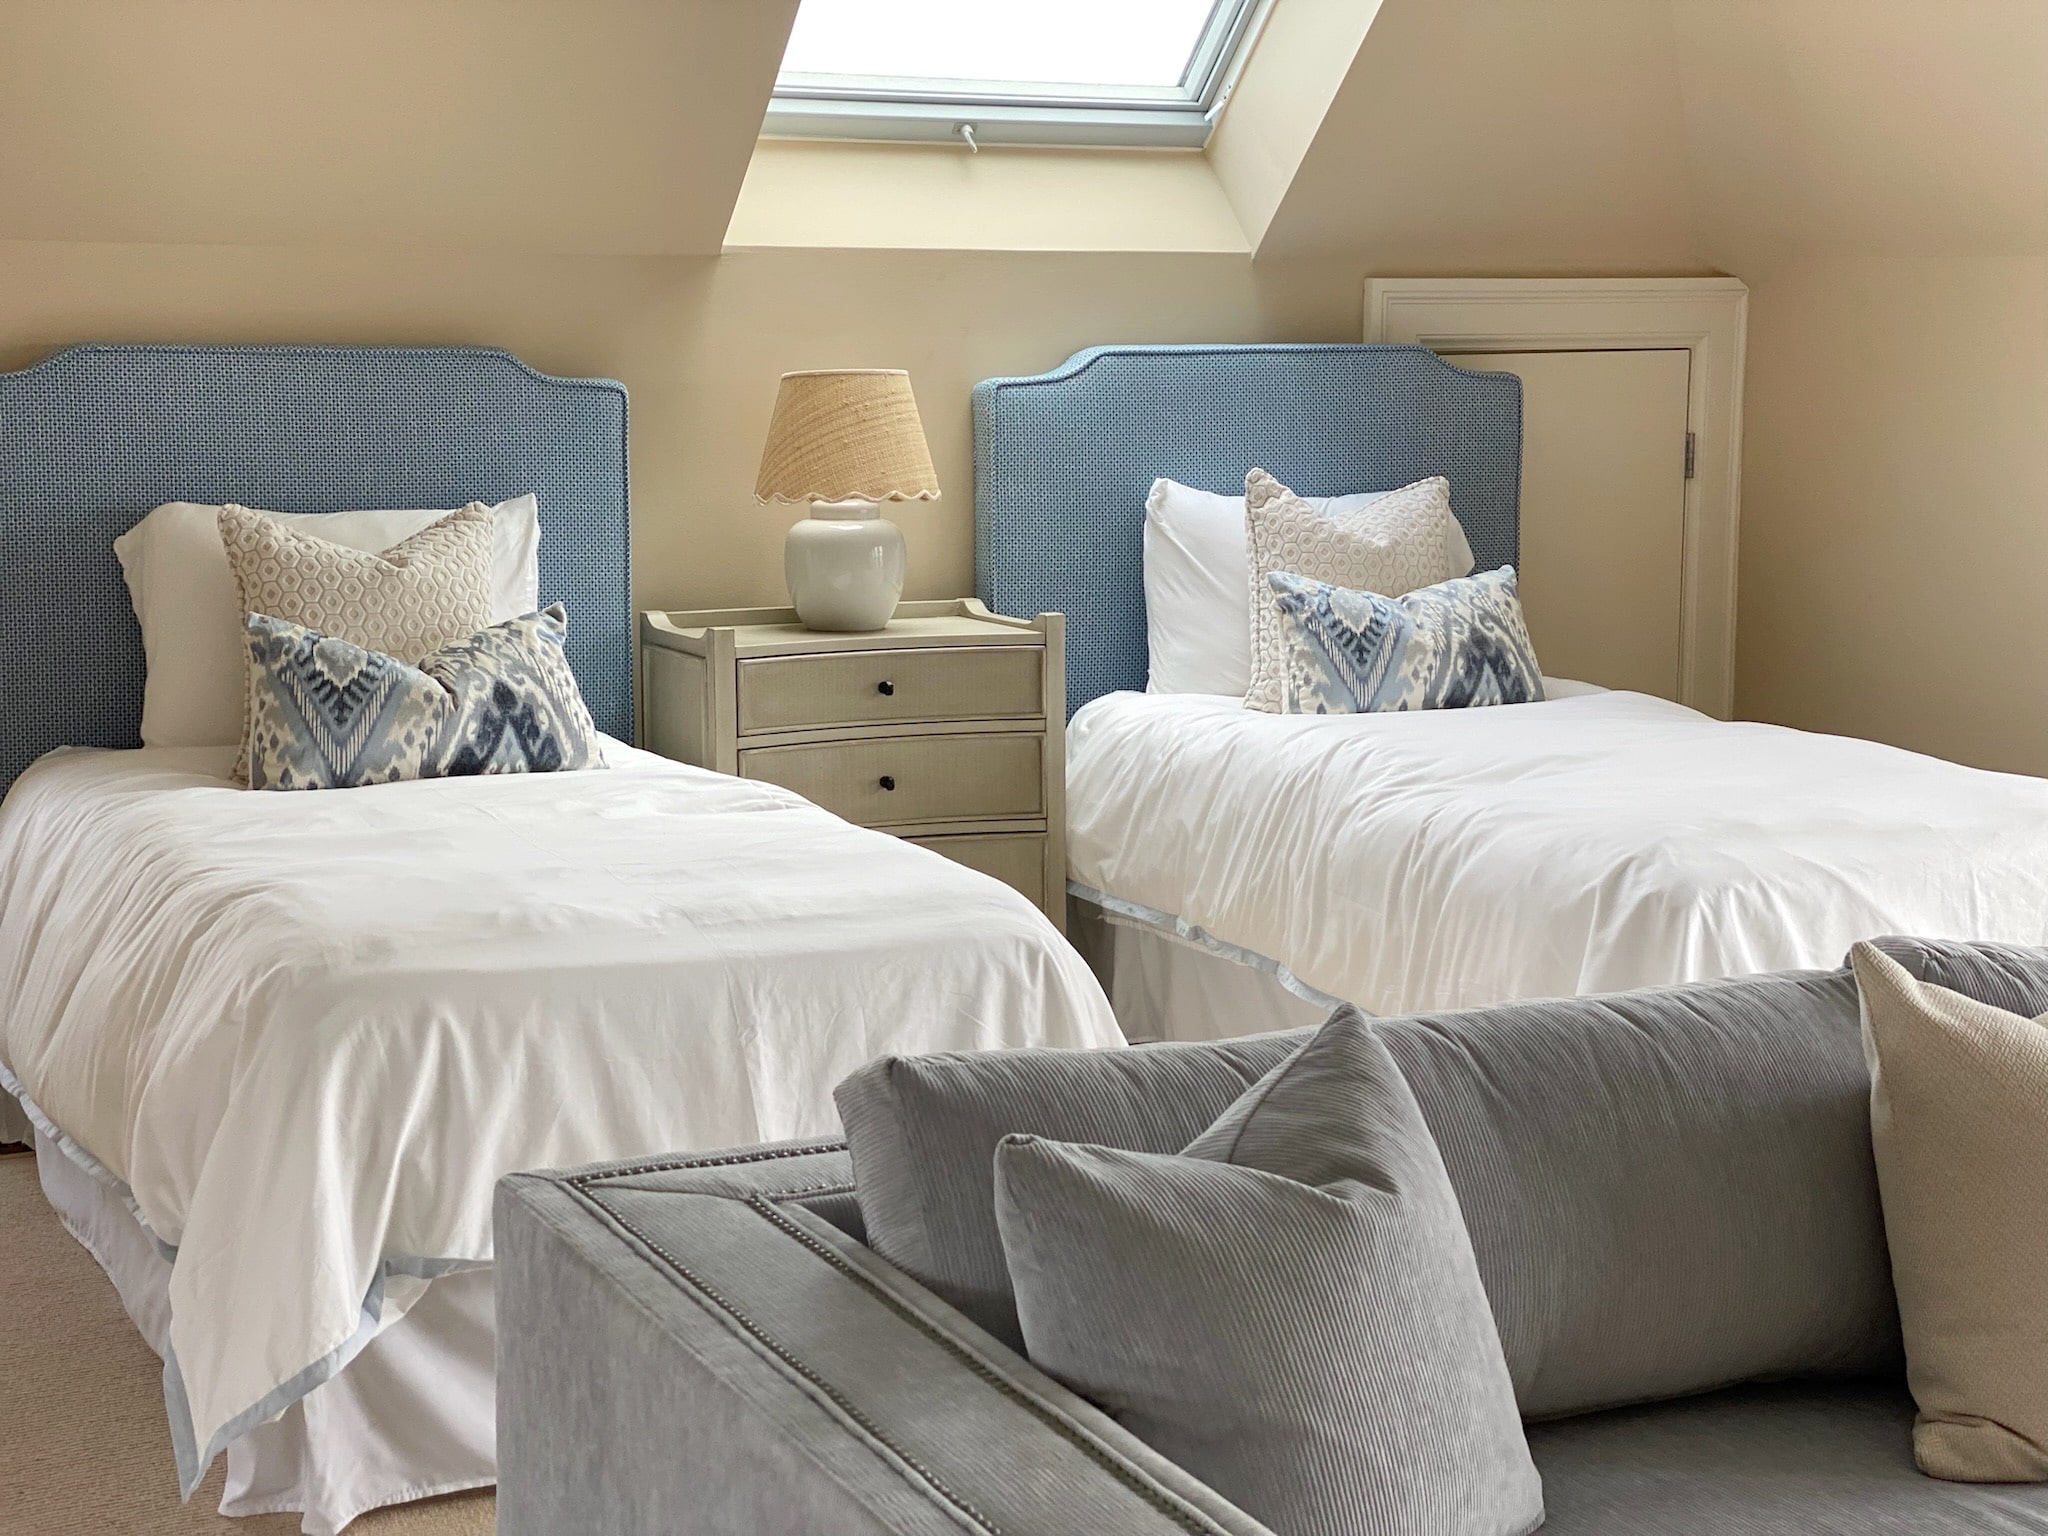 A room with two twin beds showcasing a skylight feature, designed with an exquisite touch of interior design.